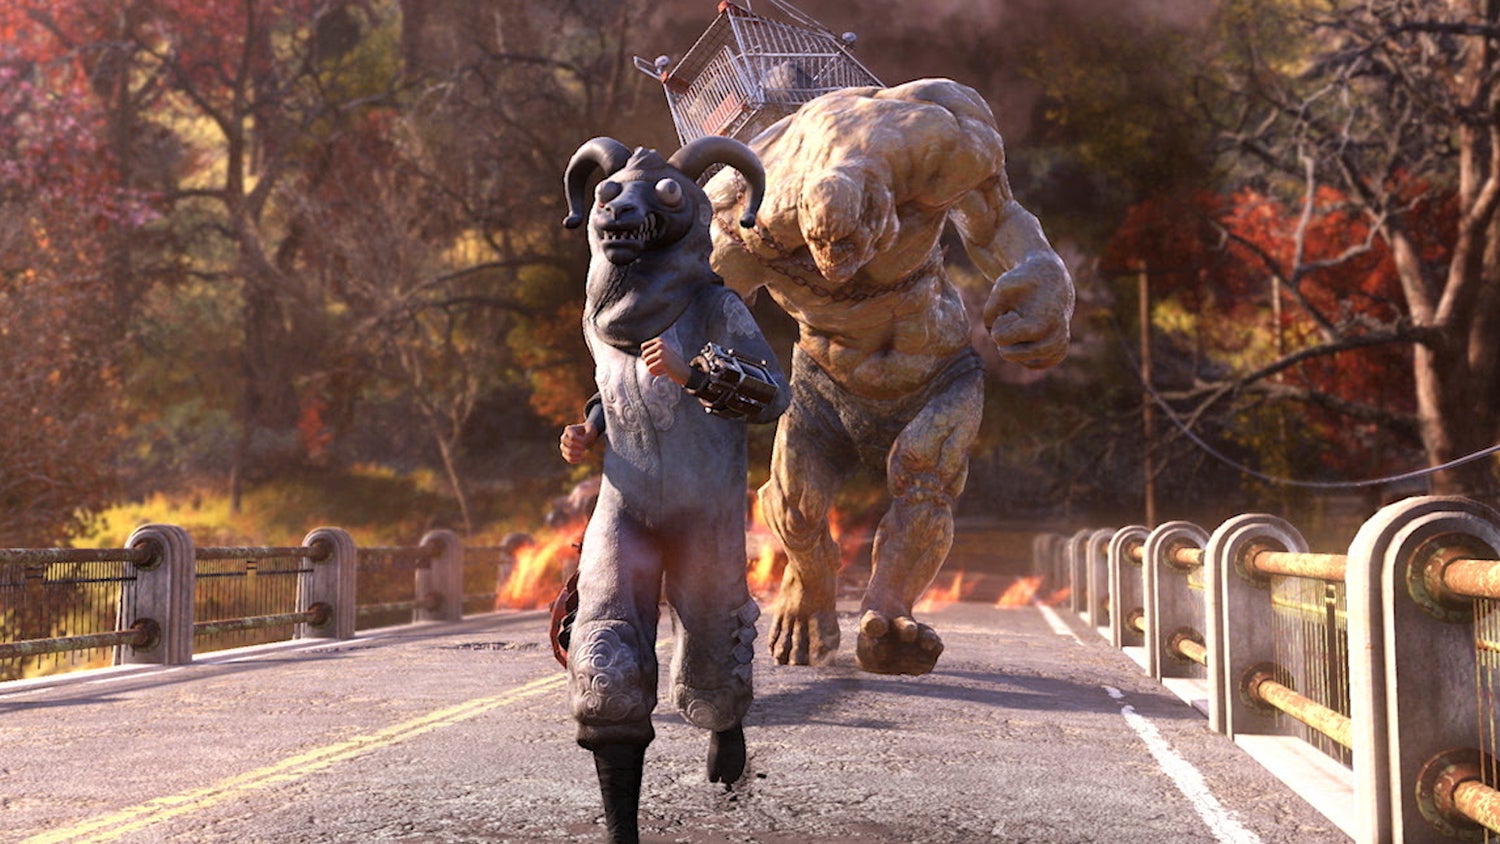 Image for Todd Howard: Fallout 76 "Had a Lot of Difficulties During Development"